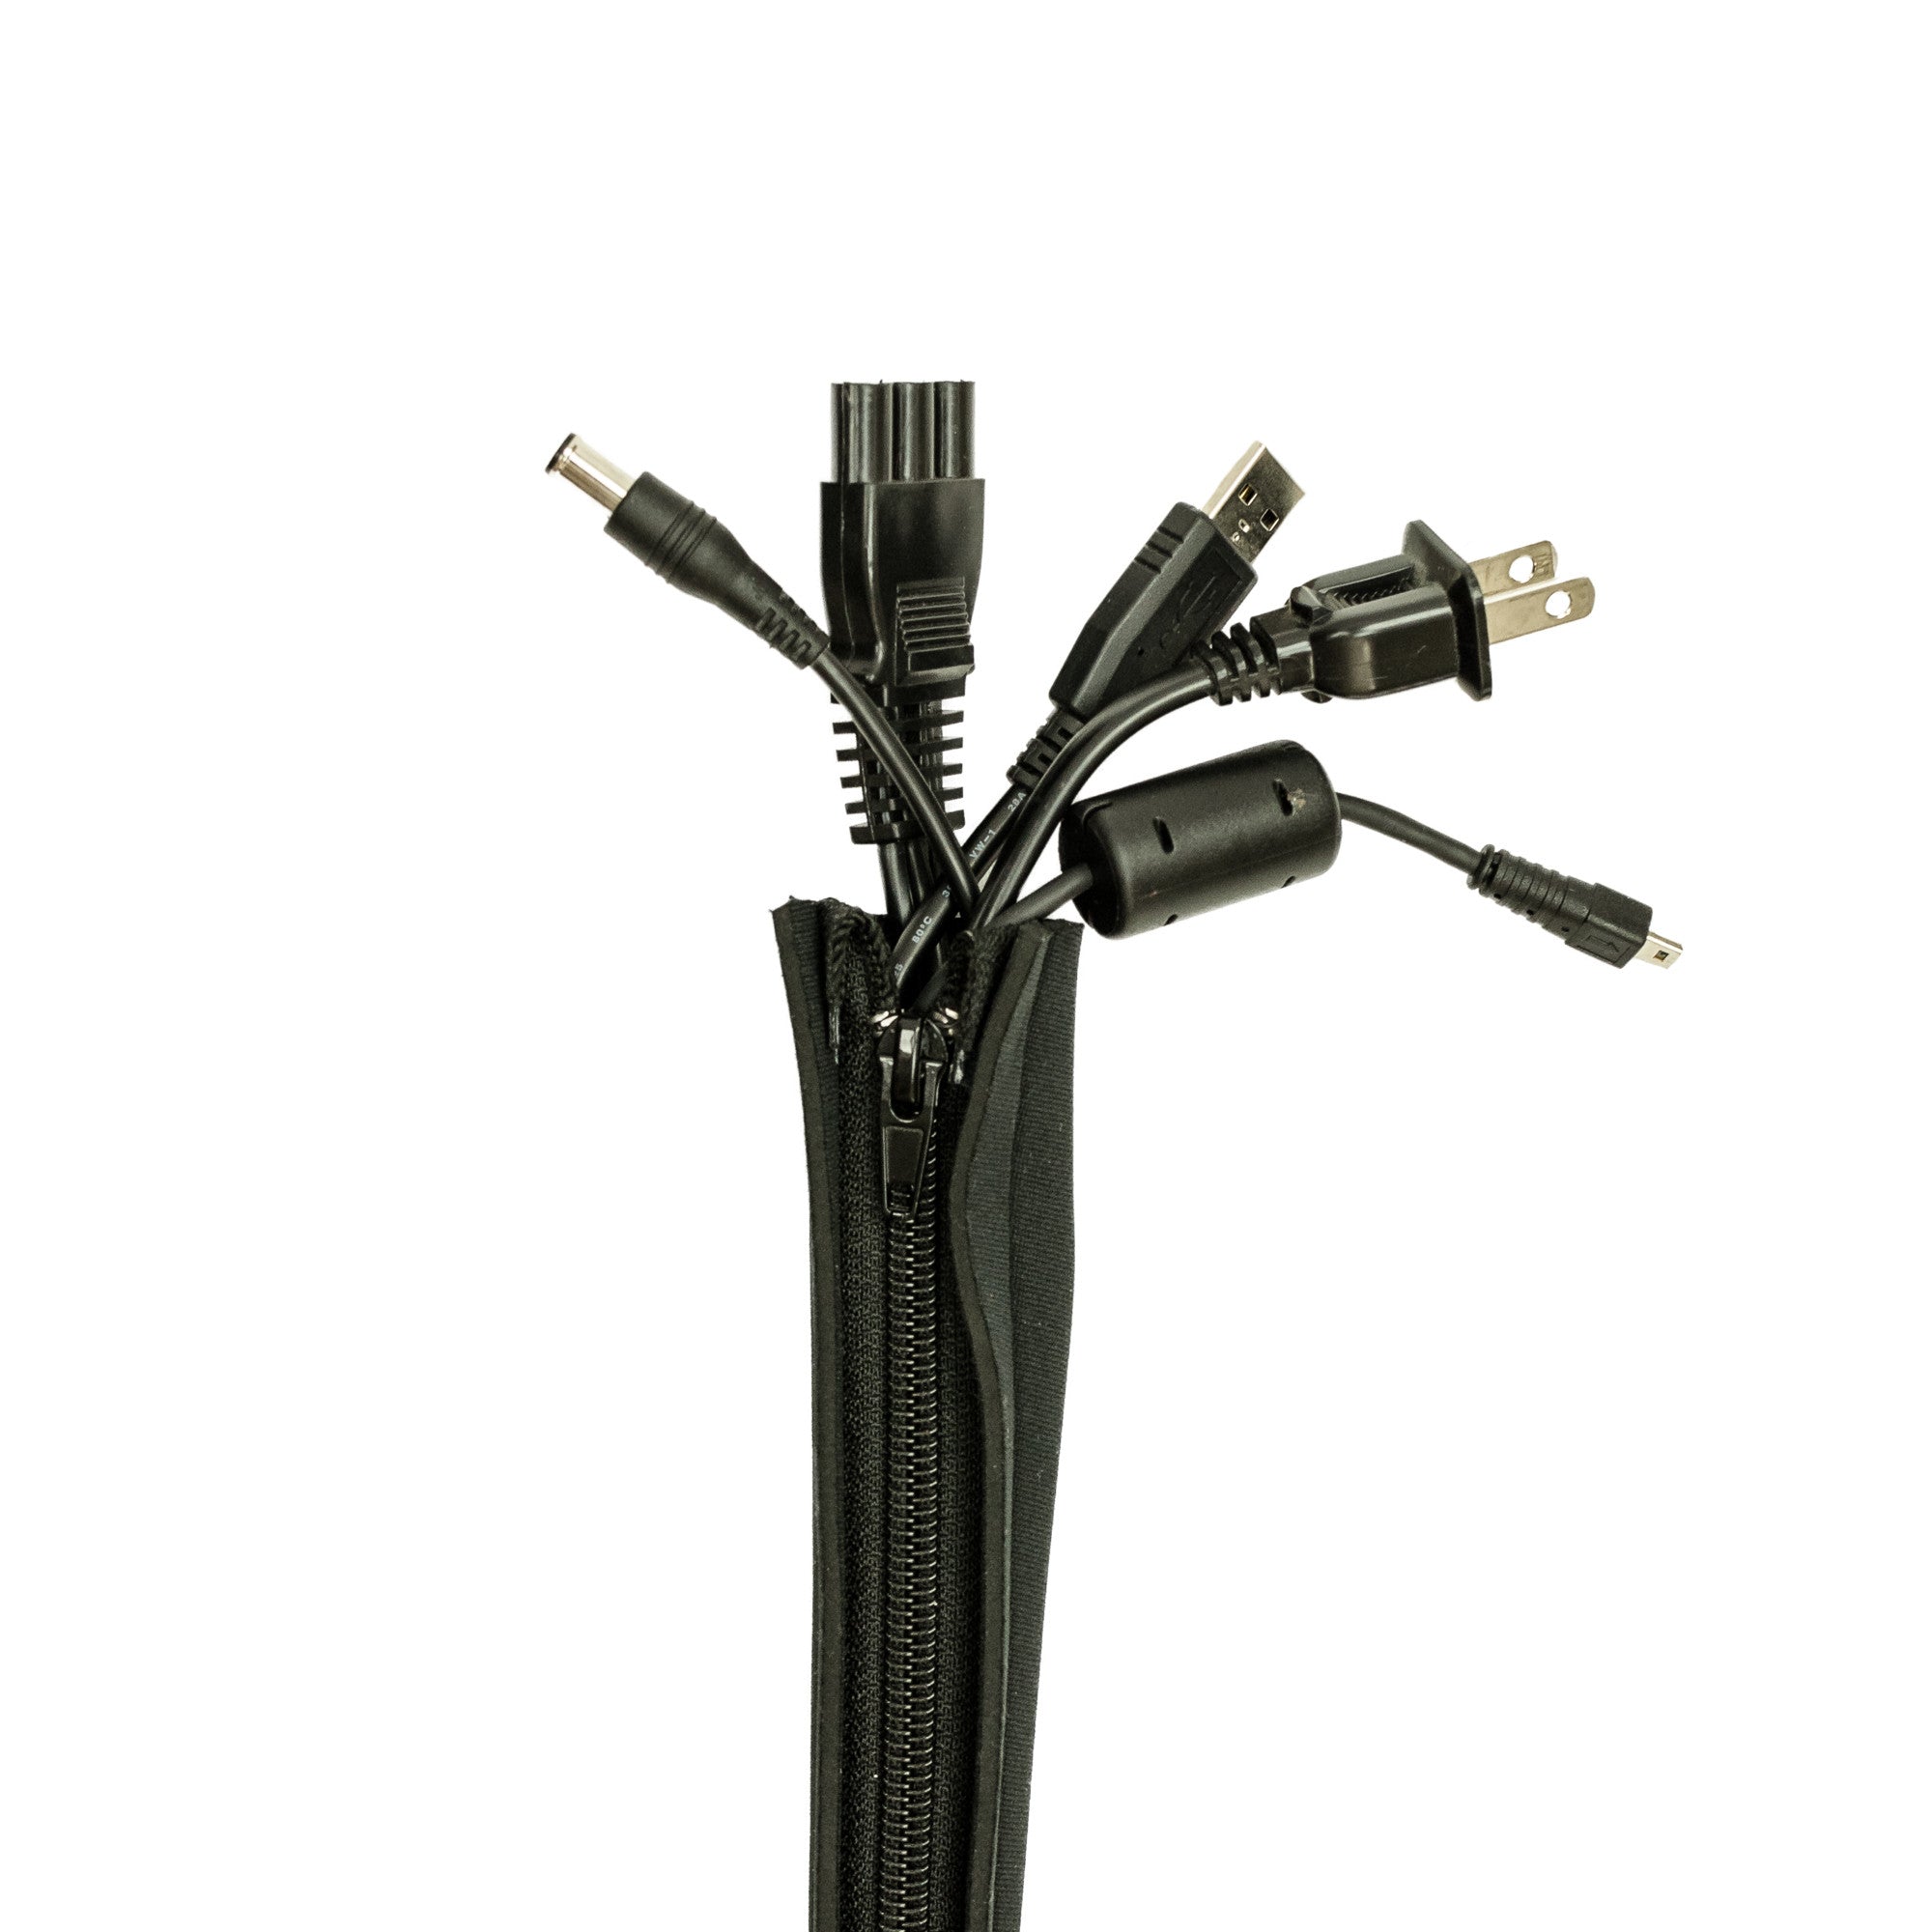 Cable and Wire Protection- Why you need to protect them & what